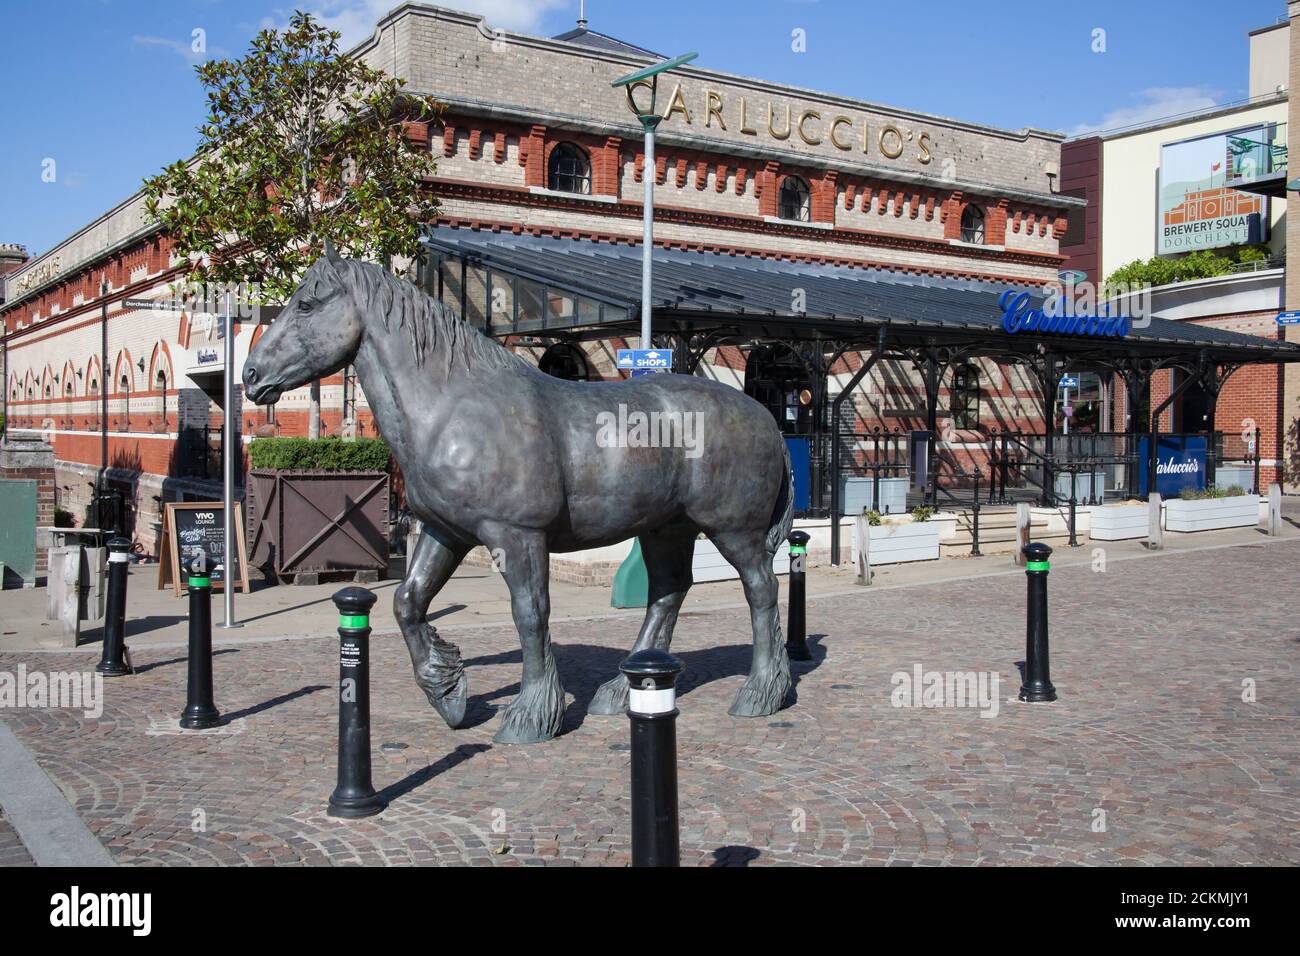 Brewery Square with an equine statue by Shirley Pace in Dorchester, Dorset in the UK. Taken on the 20th July 2020. Stock Photo